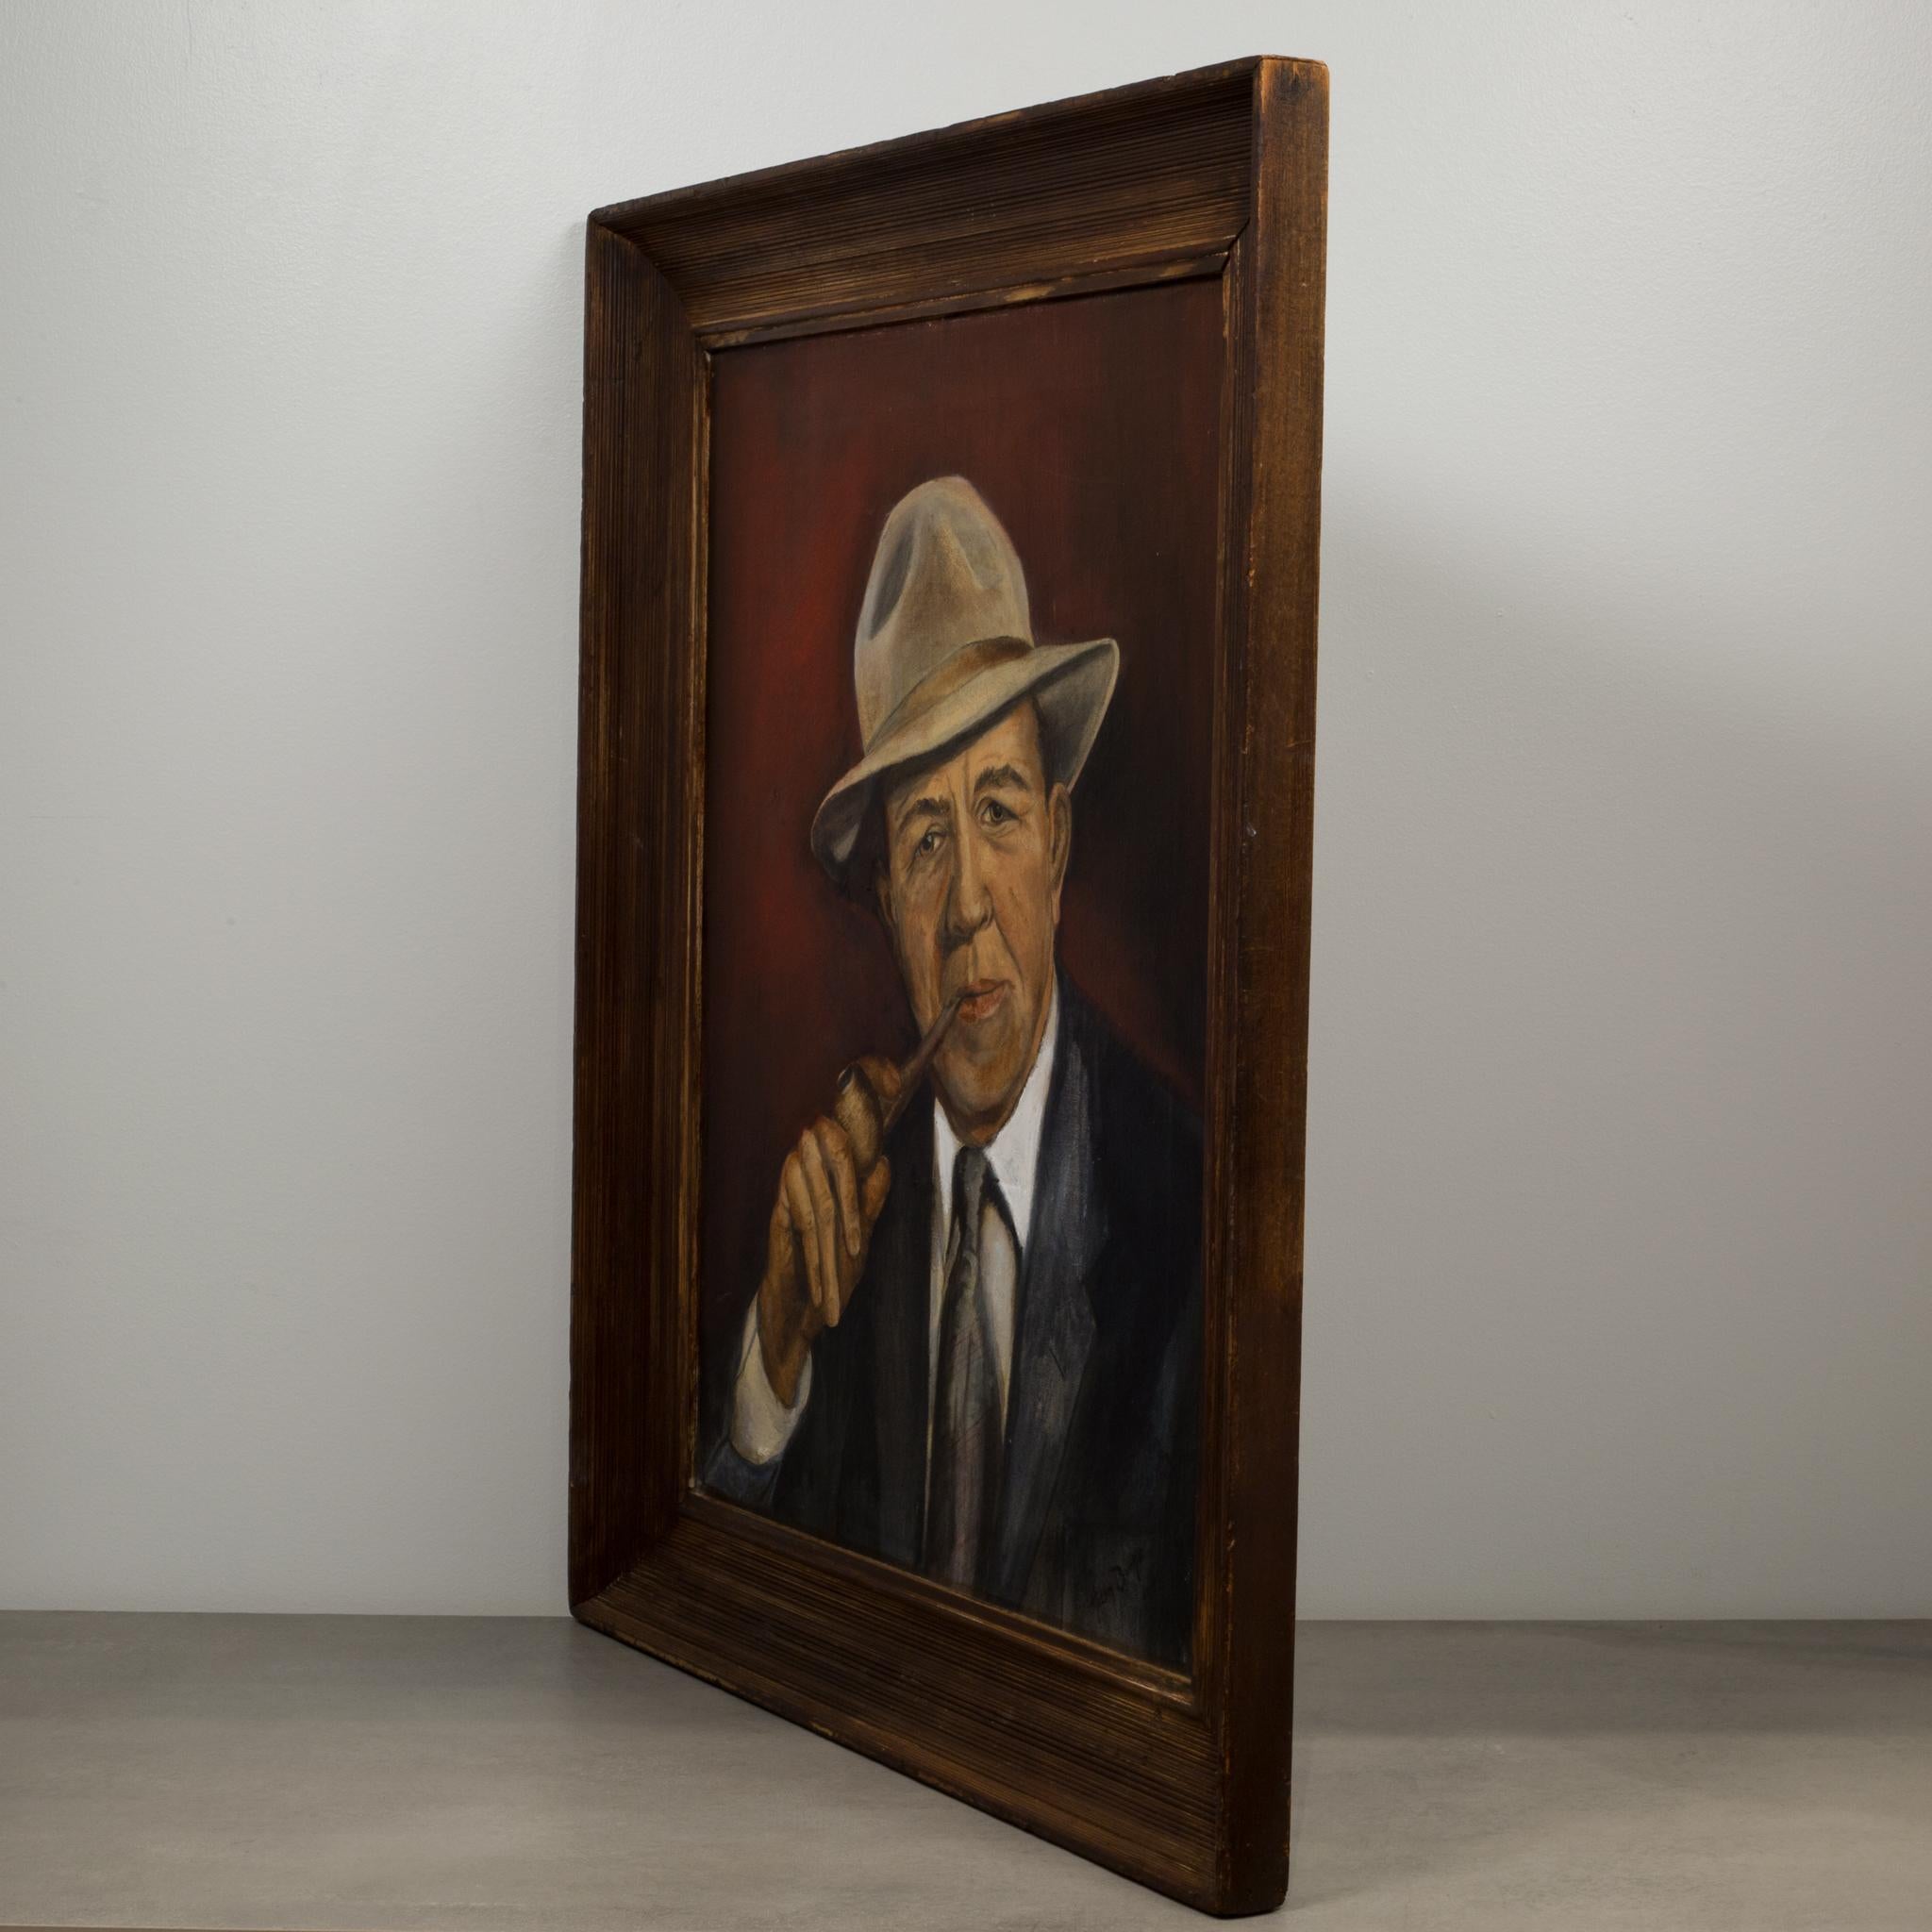 About:

This is an original acrylic portrait on canvas of a gentleman with a pipe by artist Helen Burke. The style is characterized by the careful balance of color, lighting and mood. The artwork has been framed in a brown decorative frame typical